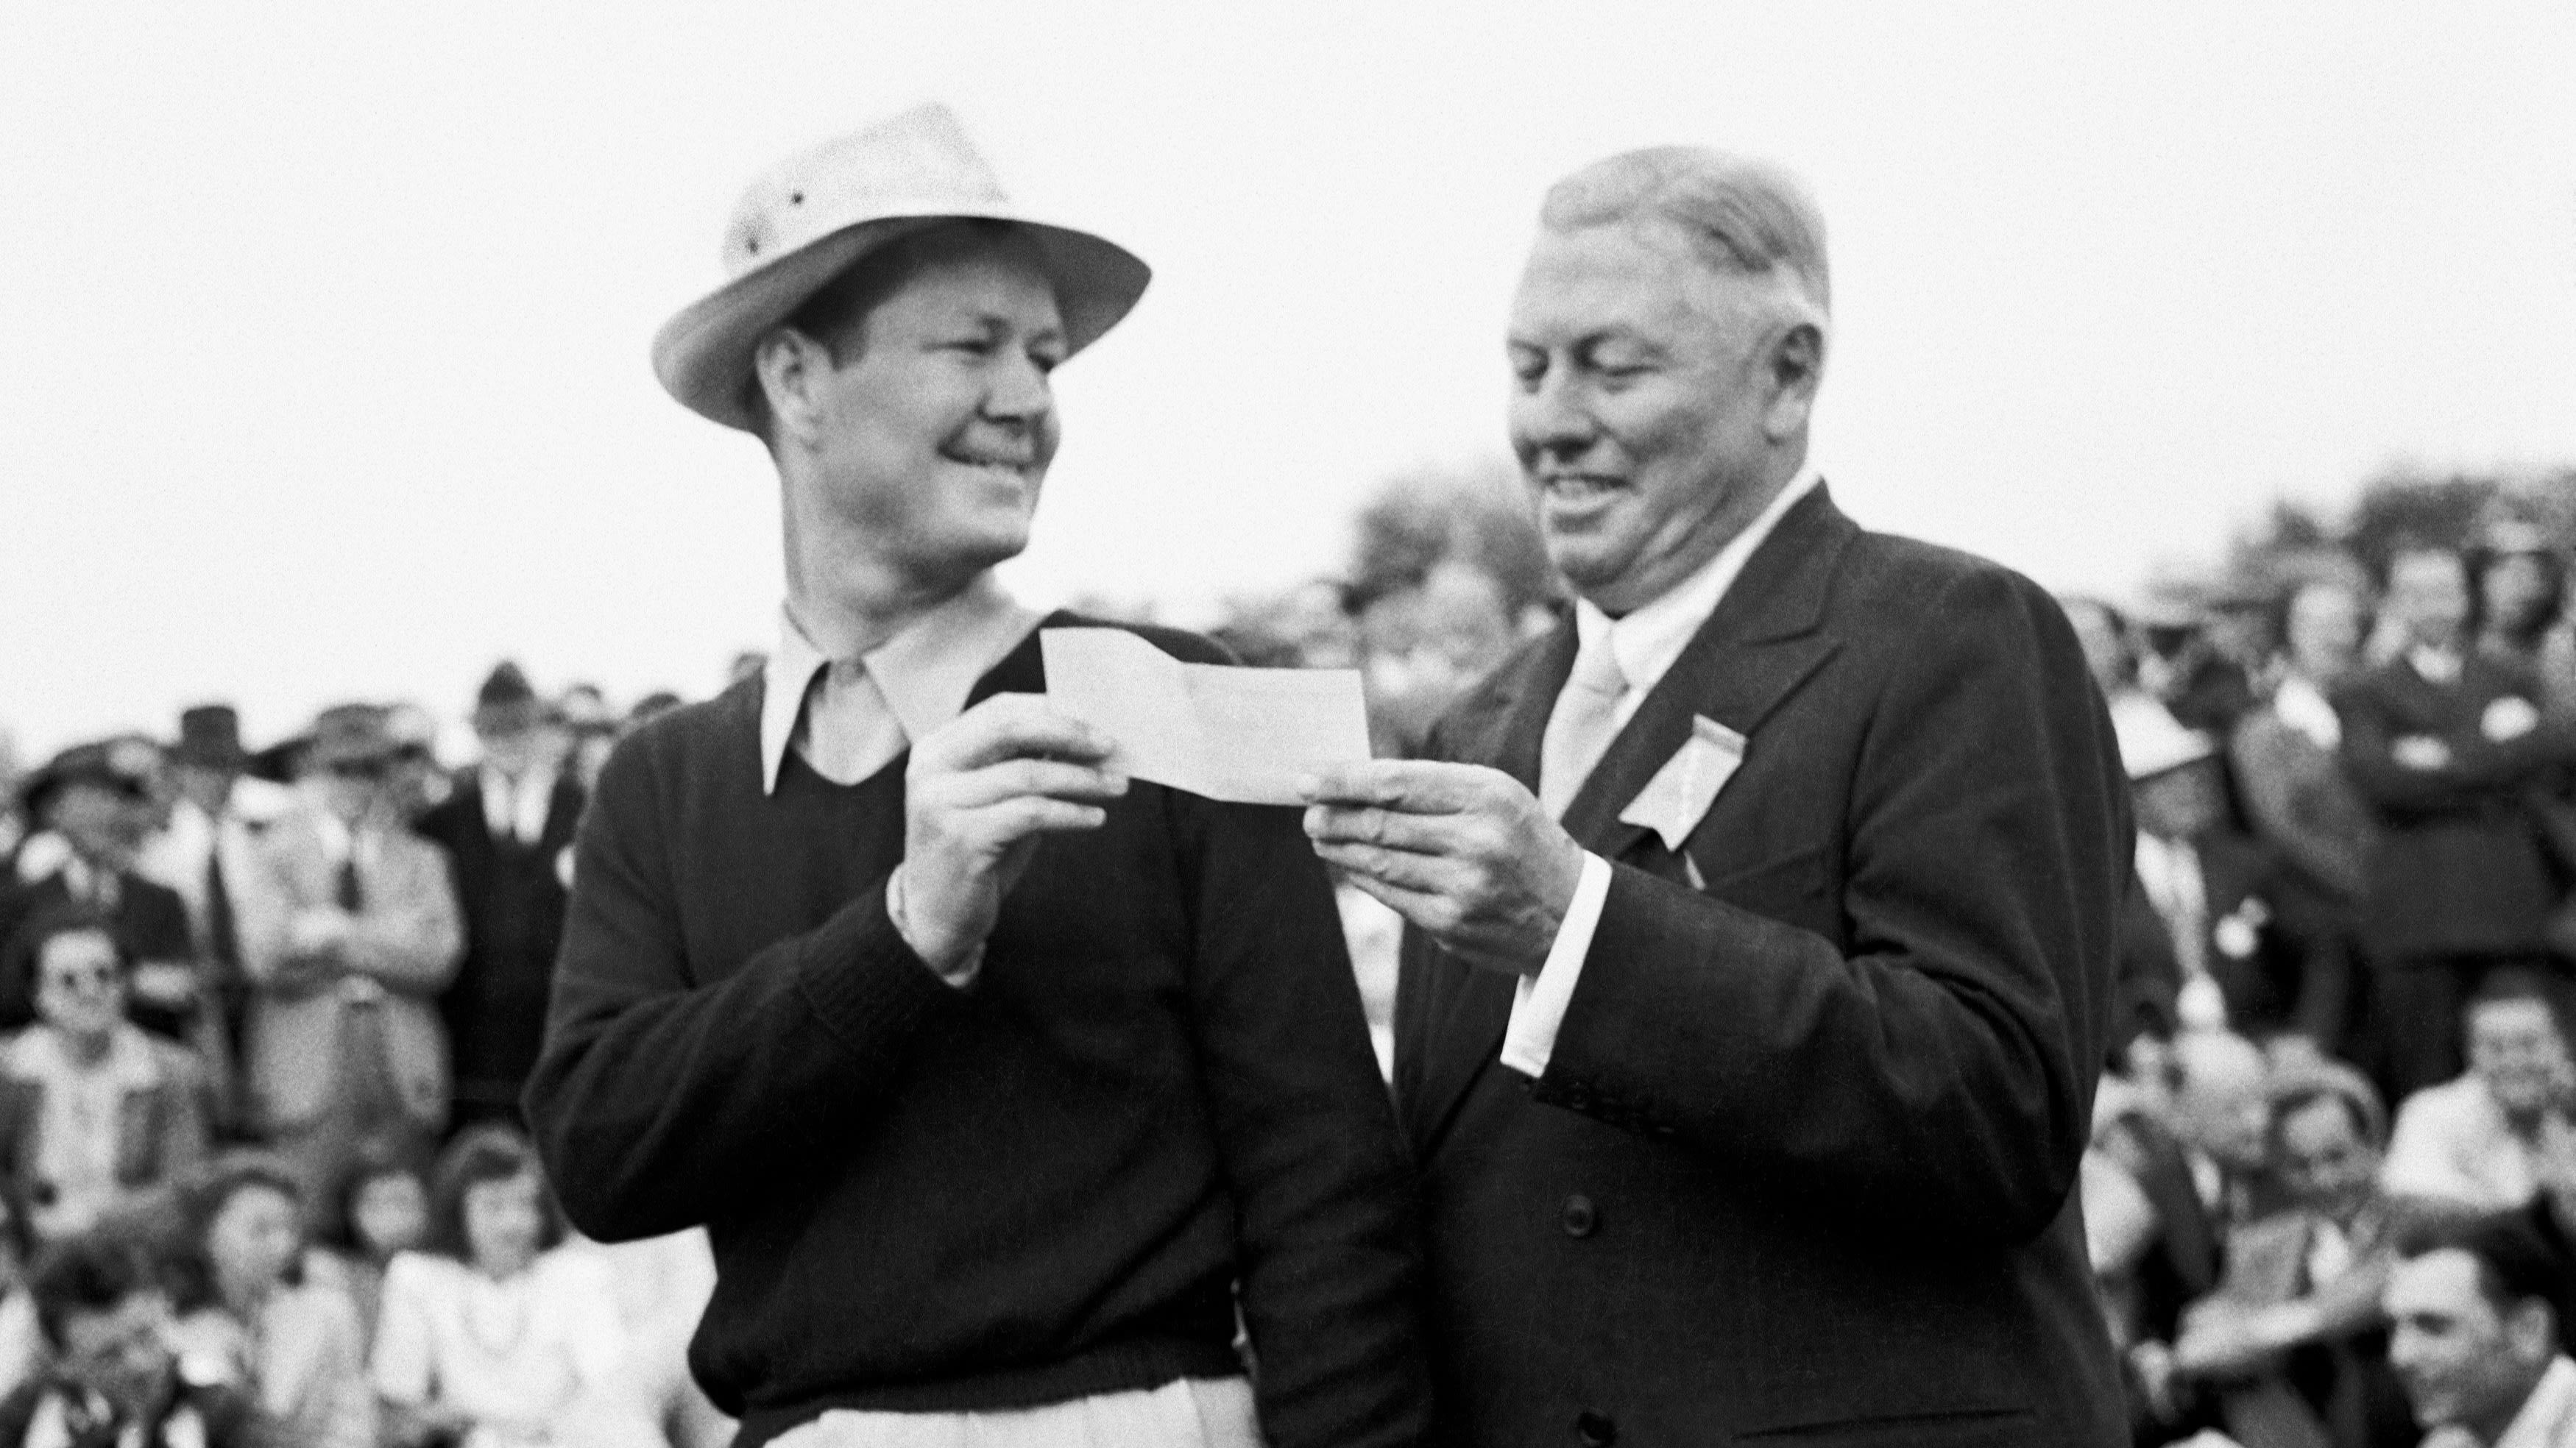 Byron Nelson stands with Alfred Bourne during the 1937 Masters. Bourne played an integral role in starting the Senior PGA Championship. (Augusta National/Getty Images)